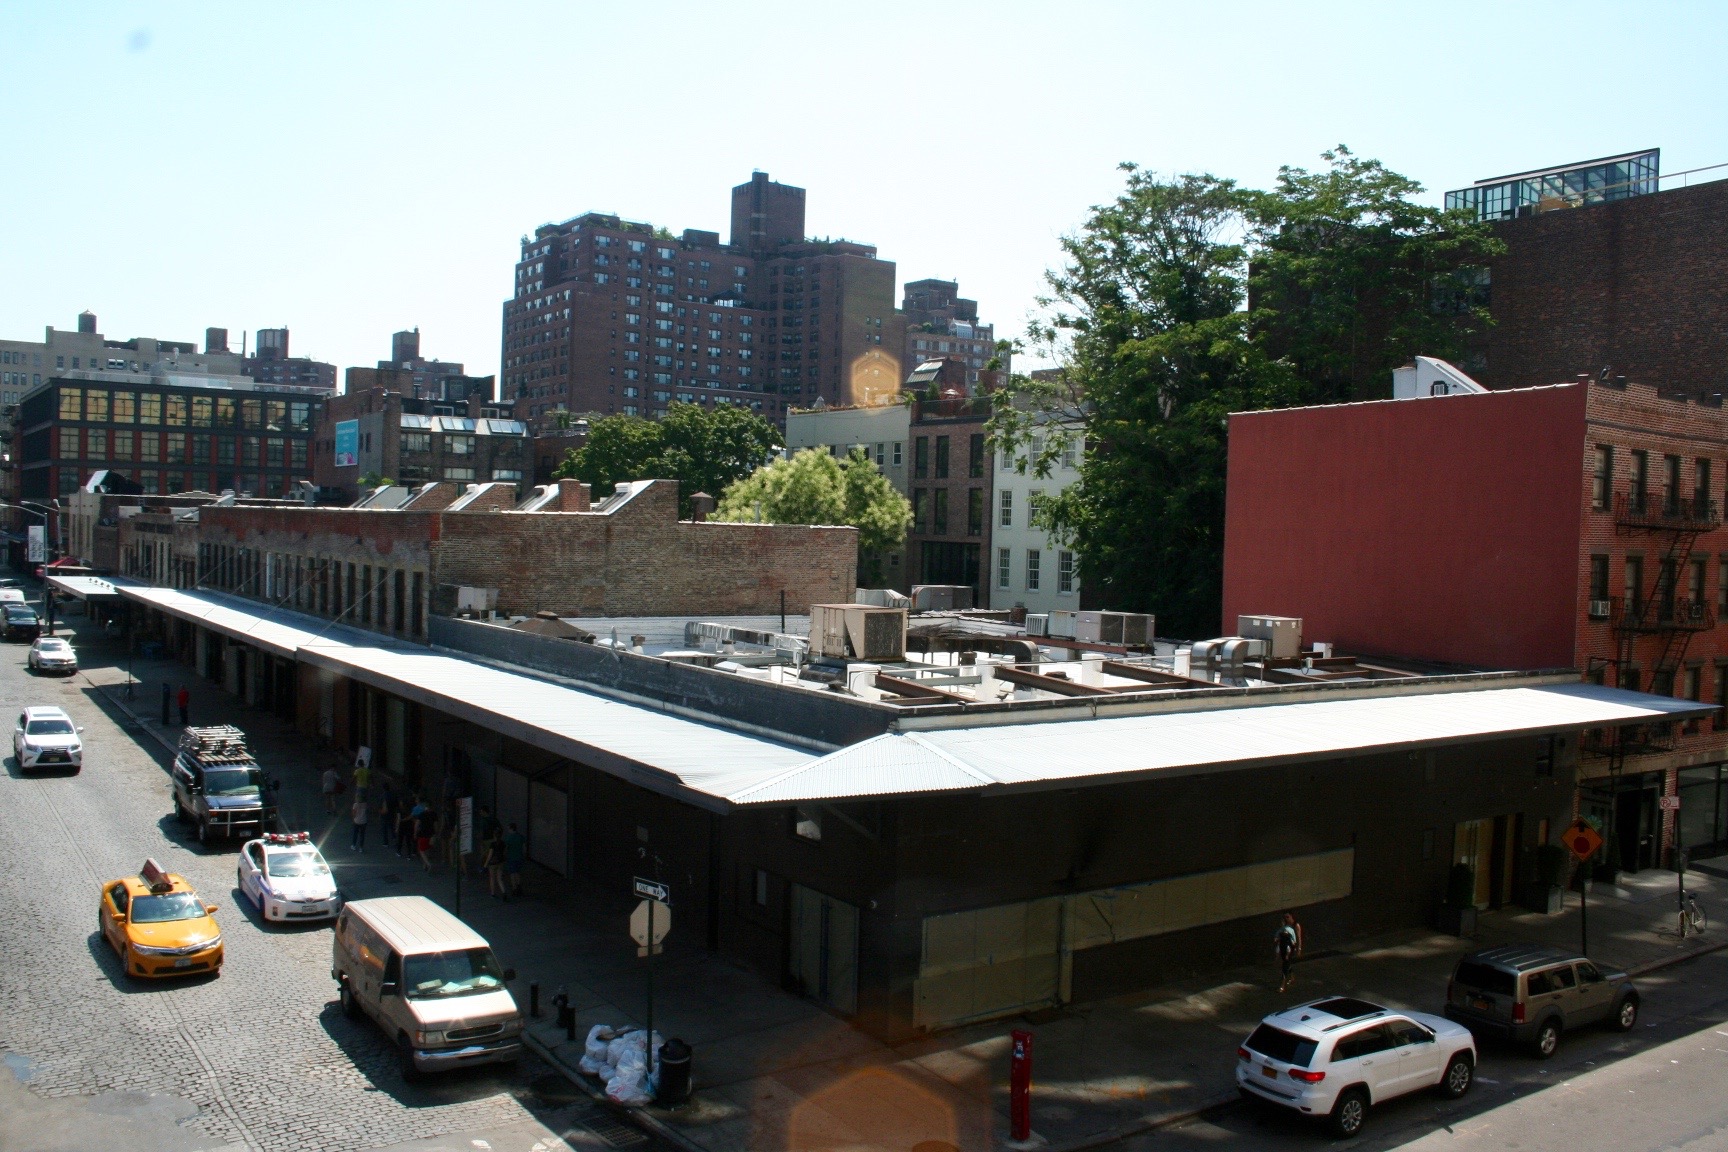 The south side of Gansevoort St. as it appears today. Photo by Yannic Rack